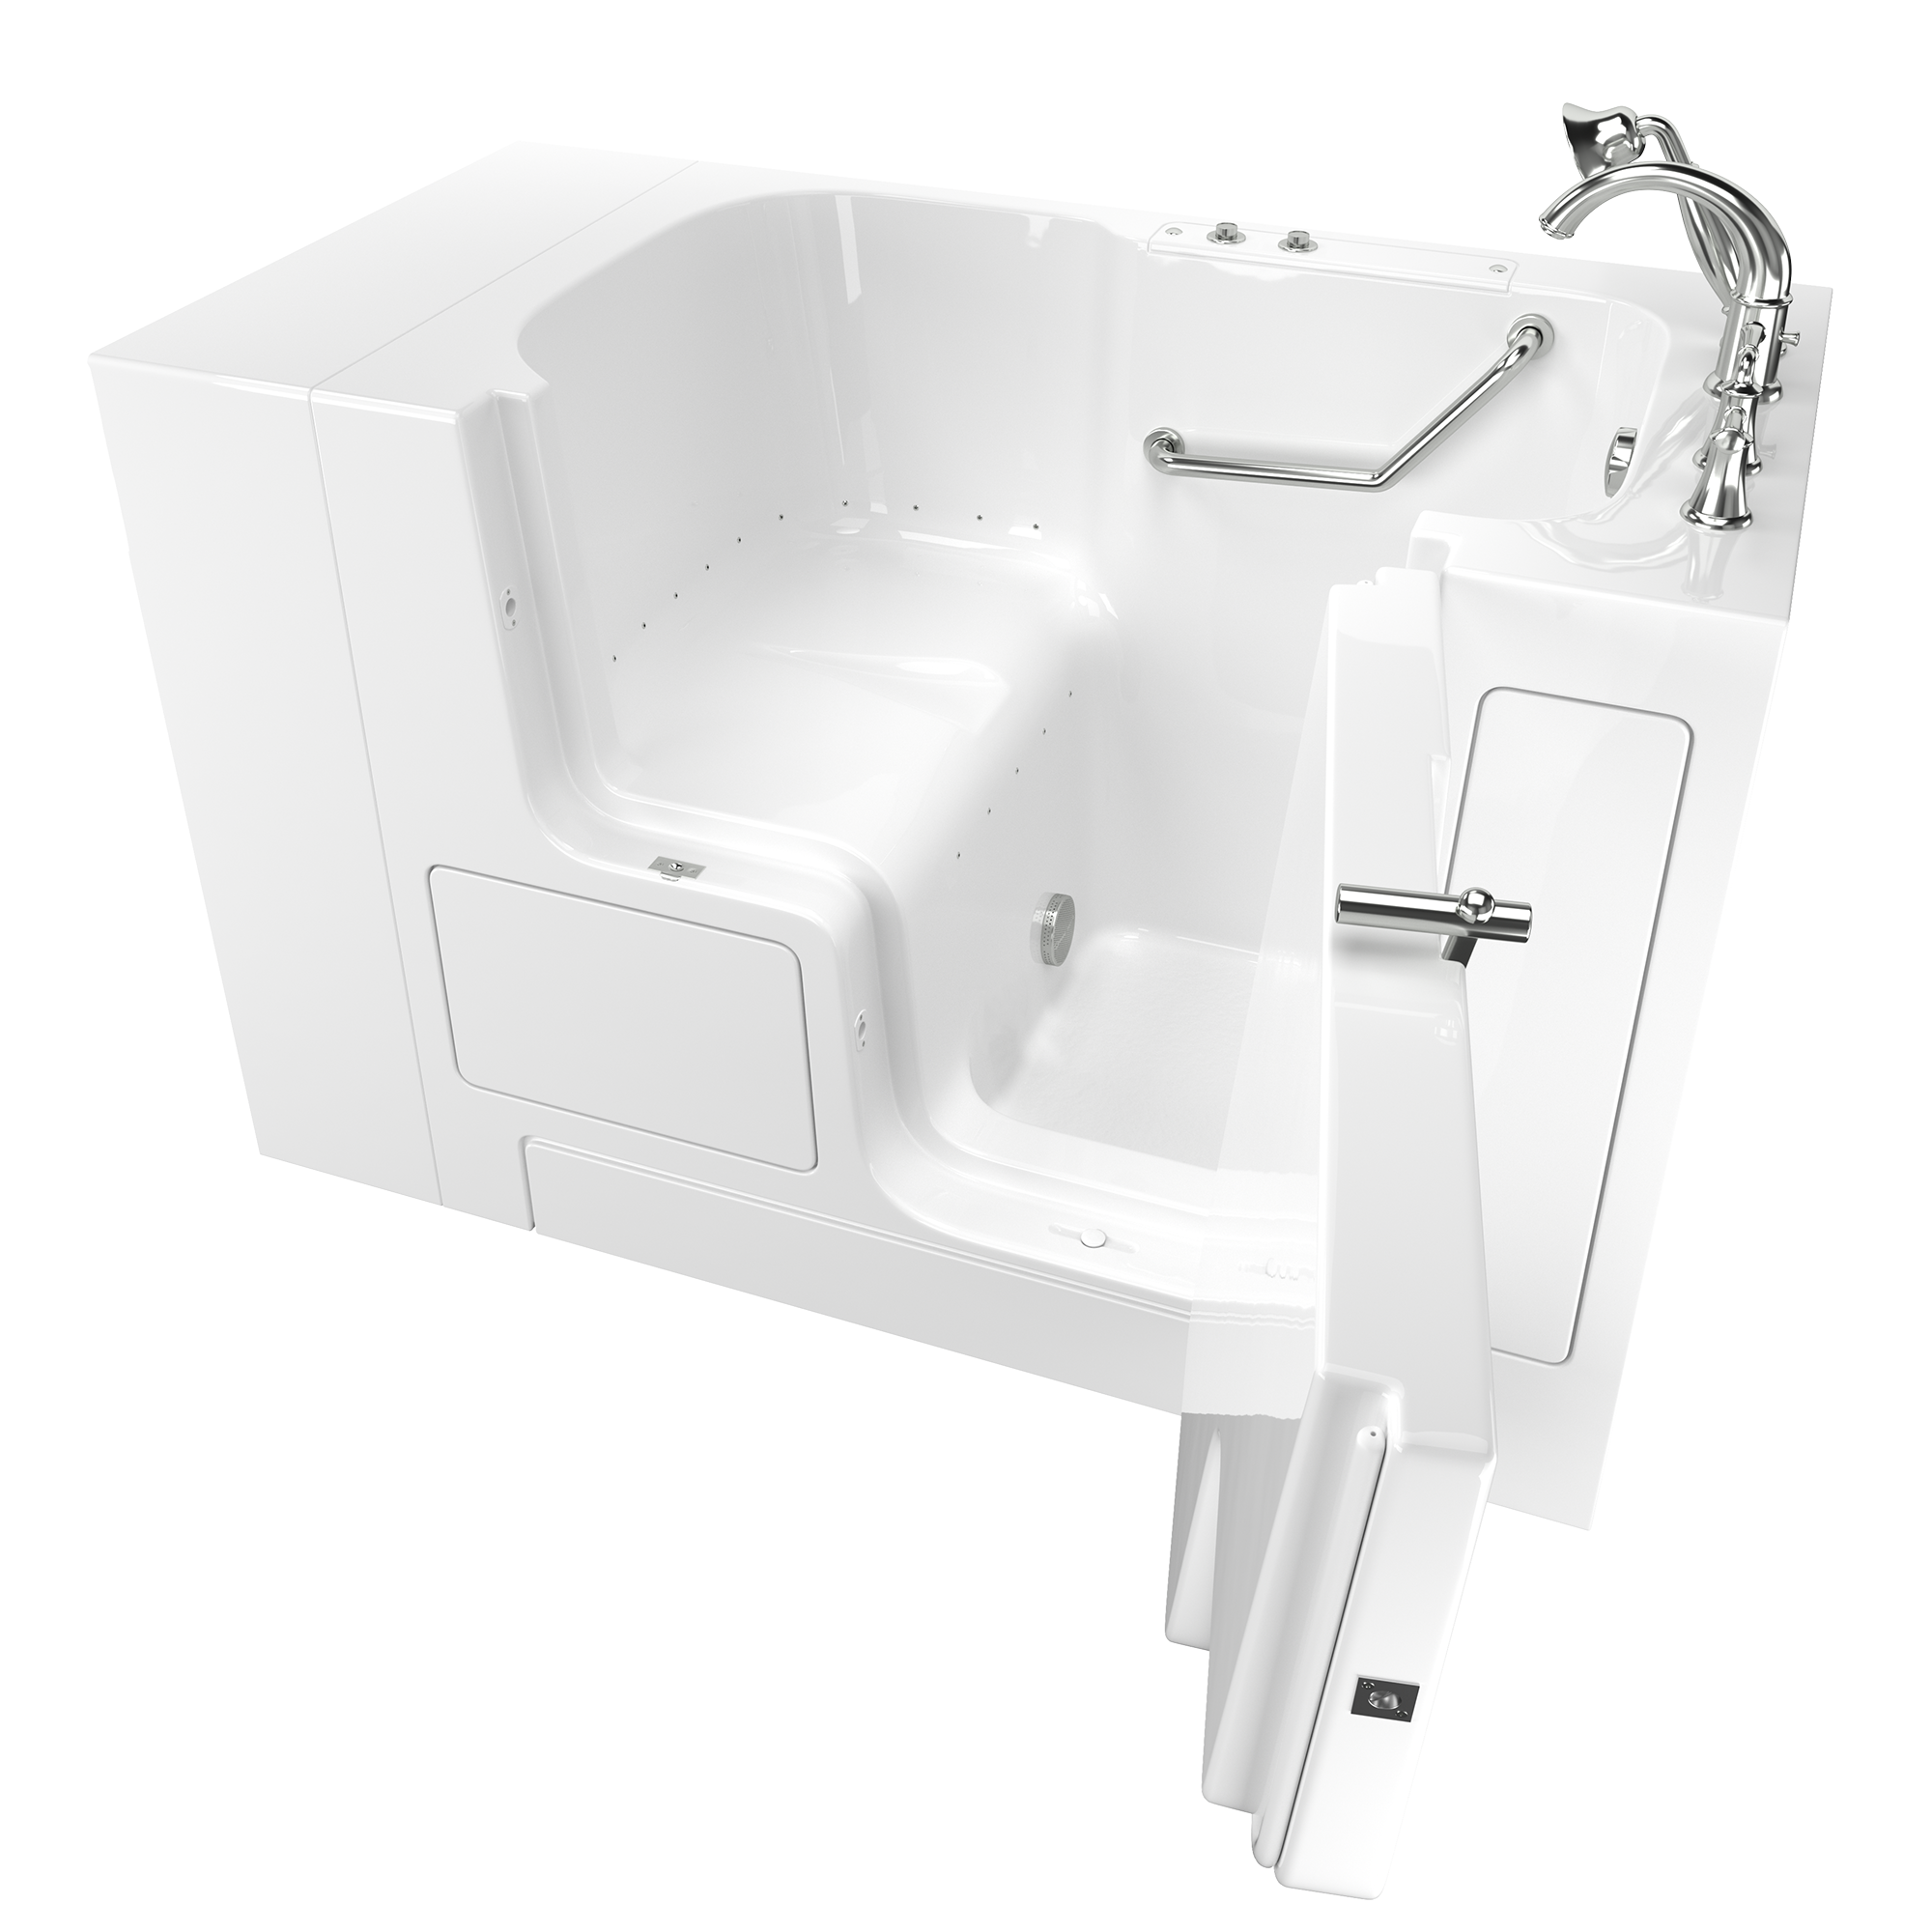 Gelcoat Value Series 32 x 52  Inch Walk in Tub With Air Spa System   Right Hand Drain With Faucet WIB WHITE